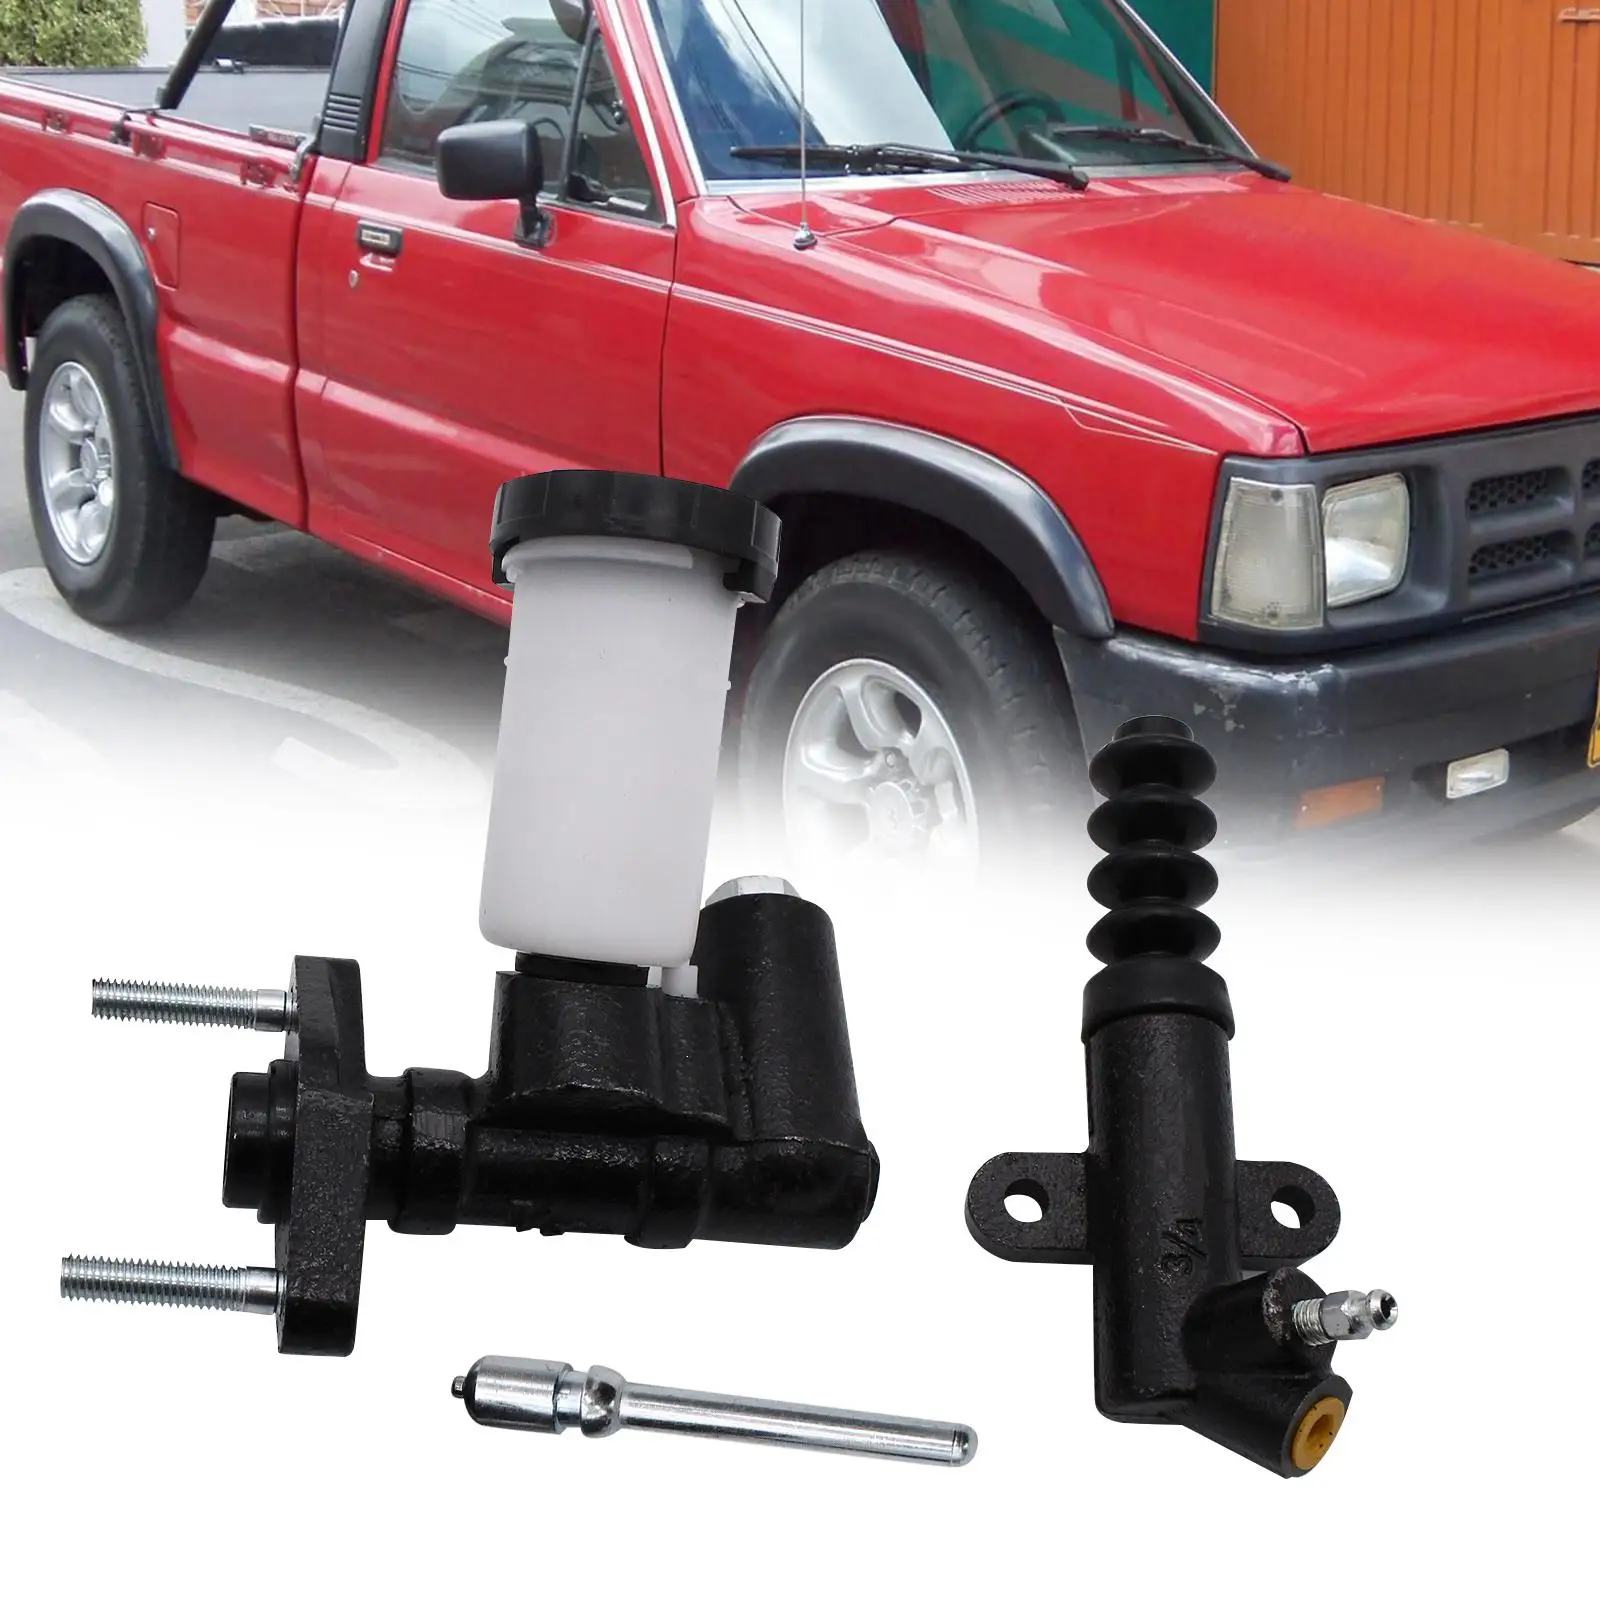 Clutch Master & Slave Cylinder Kit Replacement for Mazda B2200 1987-1993 2.2L L4 Pickup Professional Easily Install